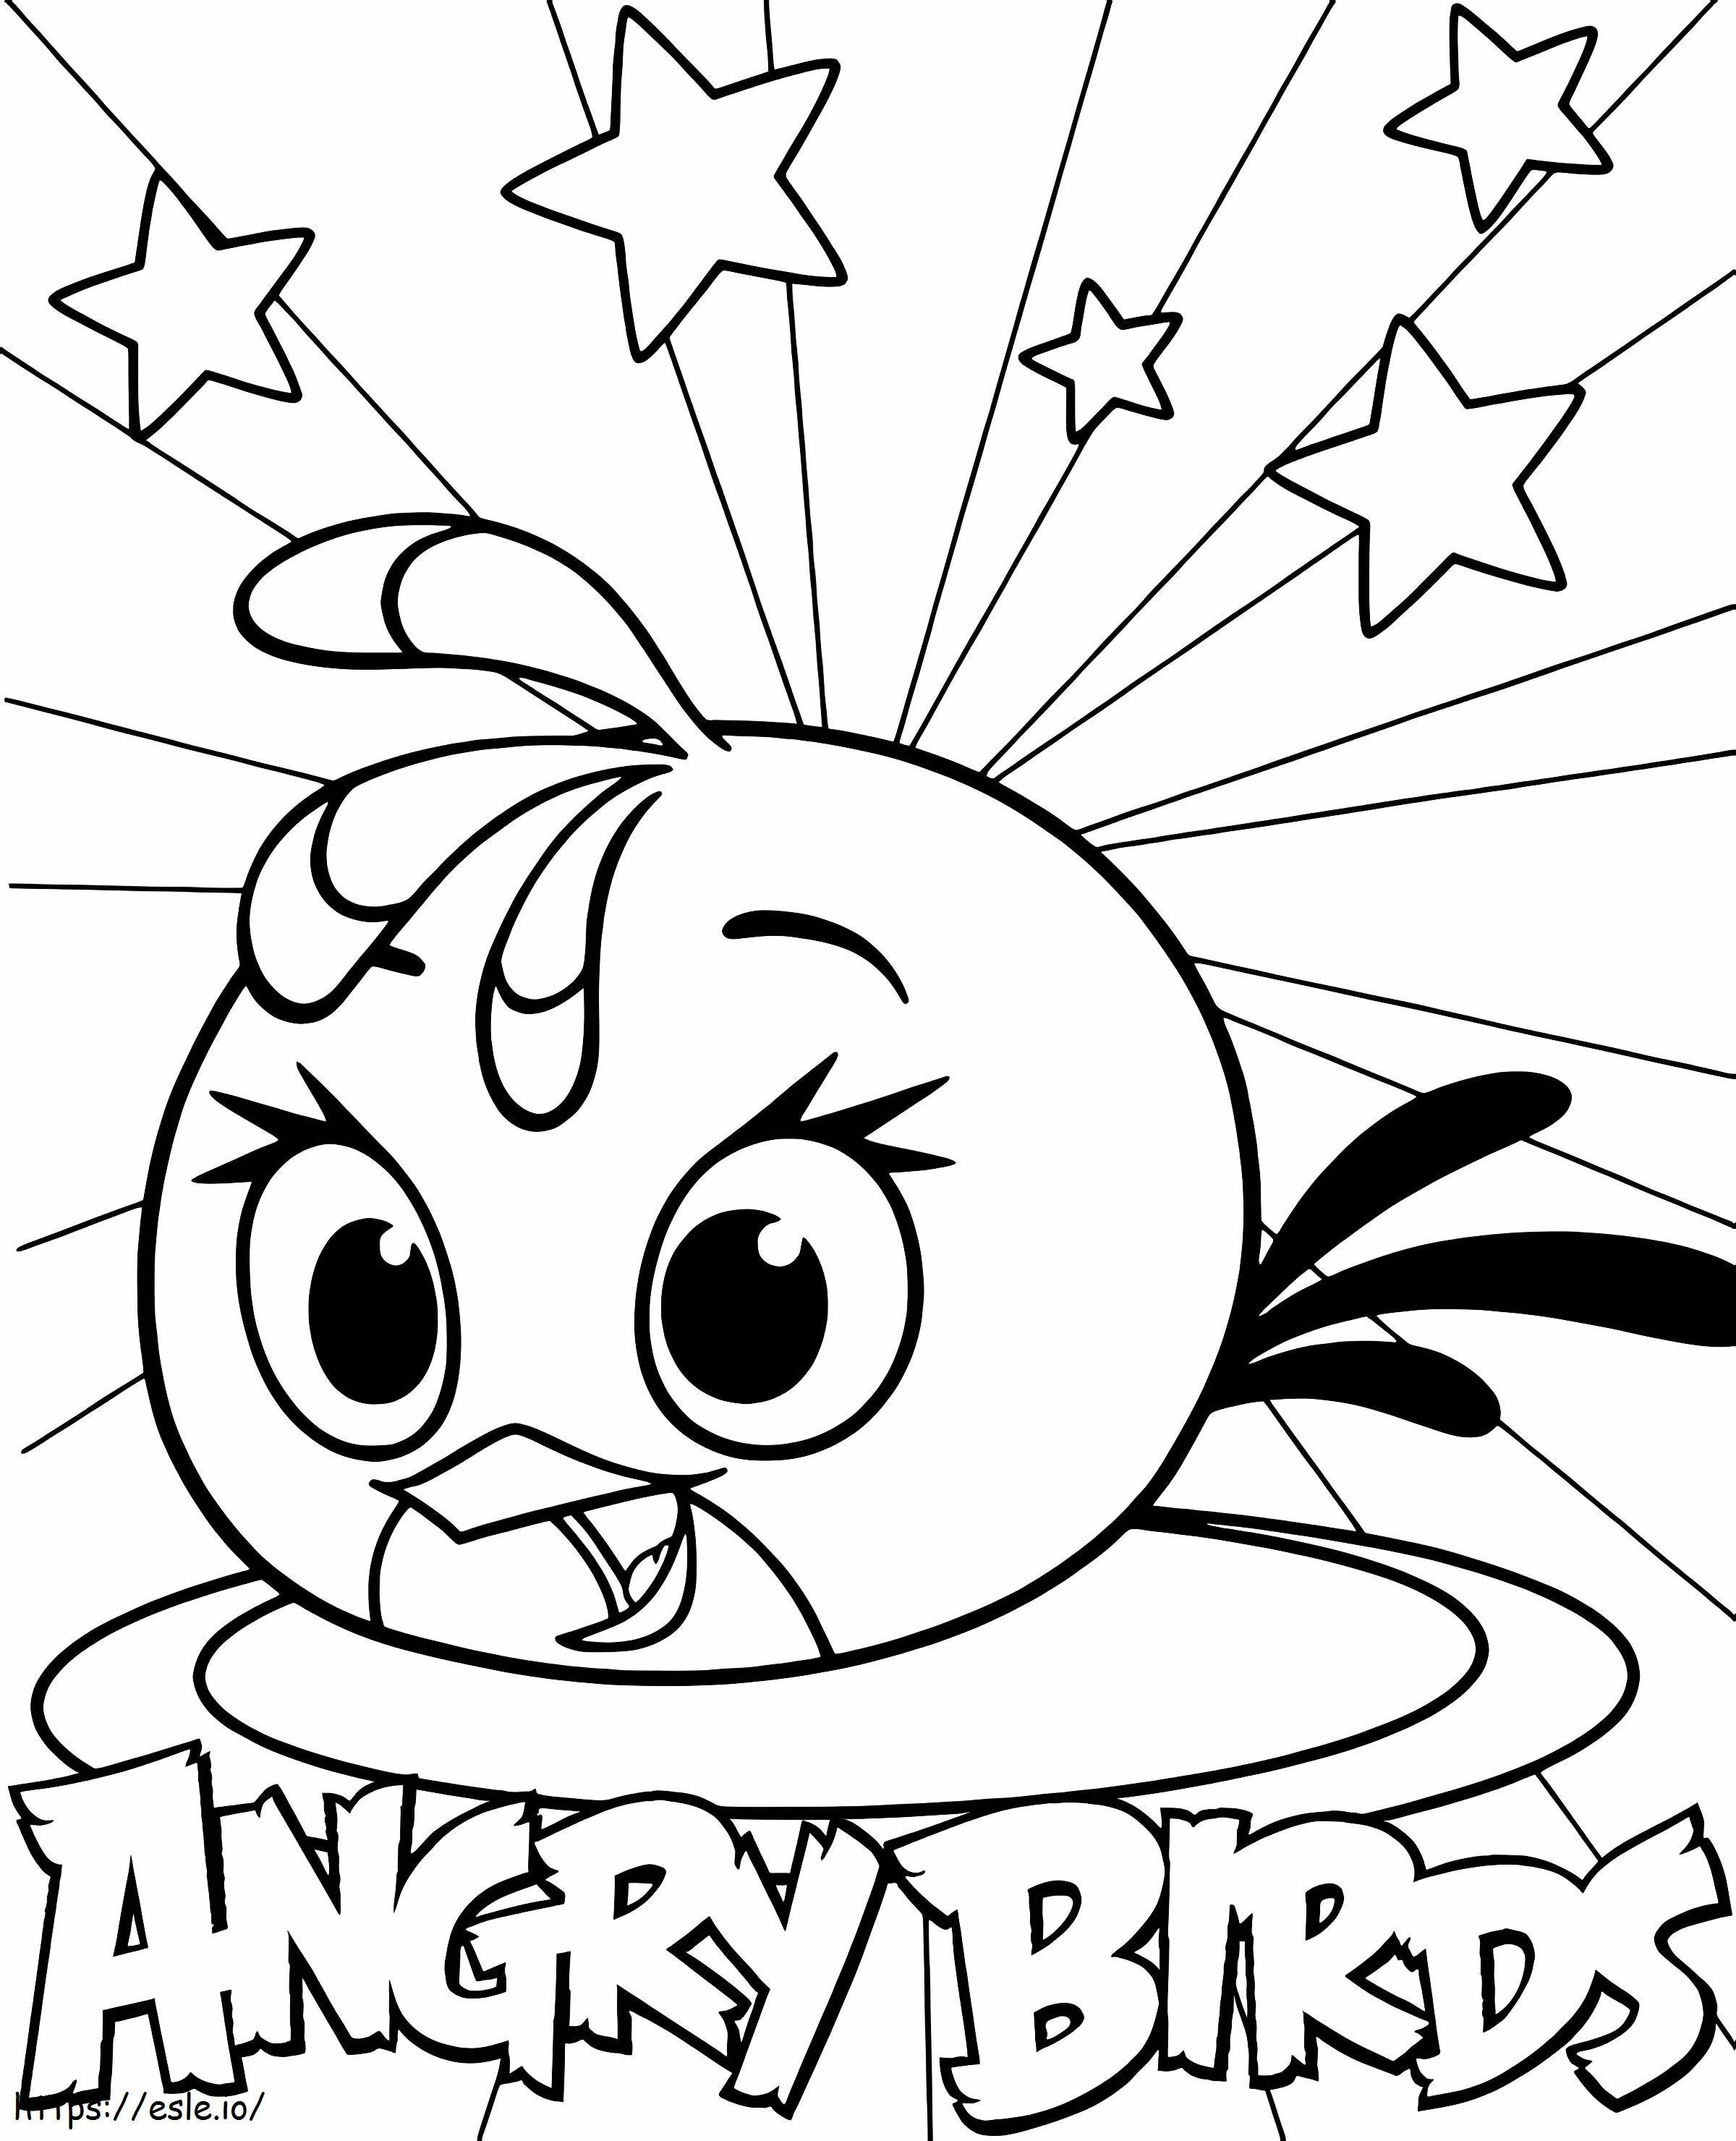 Angry Birds Stella Logo coloring page